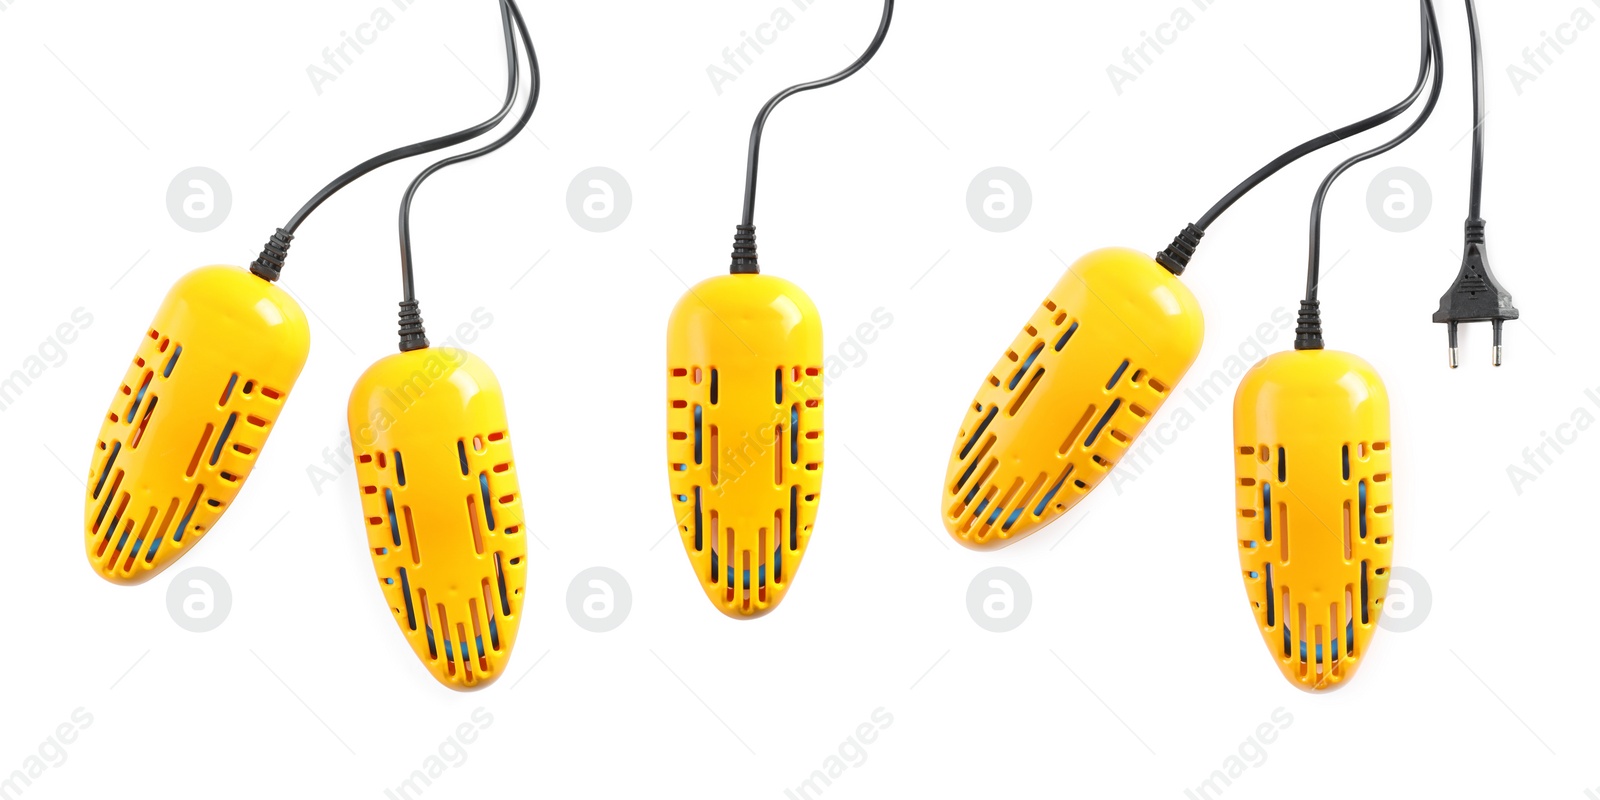 Image of Modern electric shoe dryers on white background, collage. Banner design